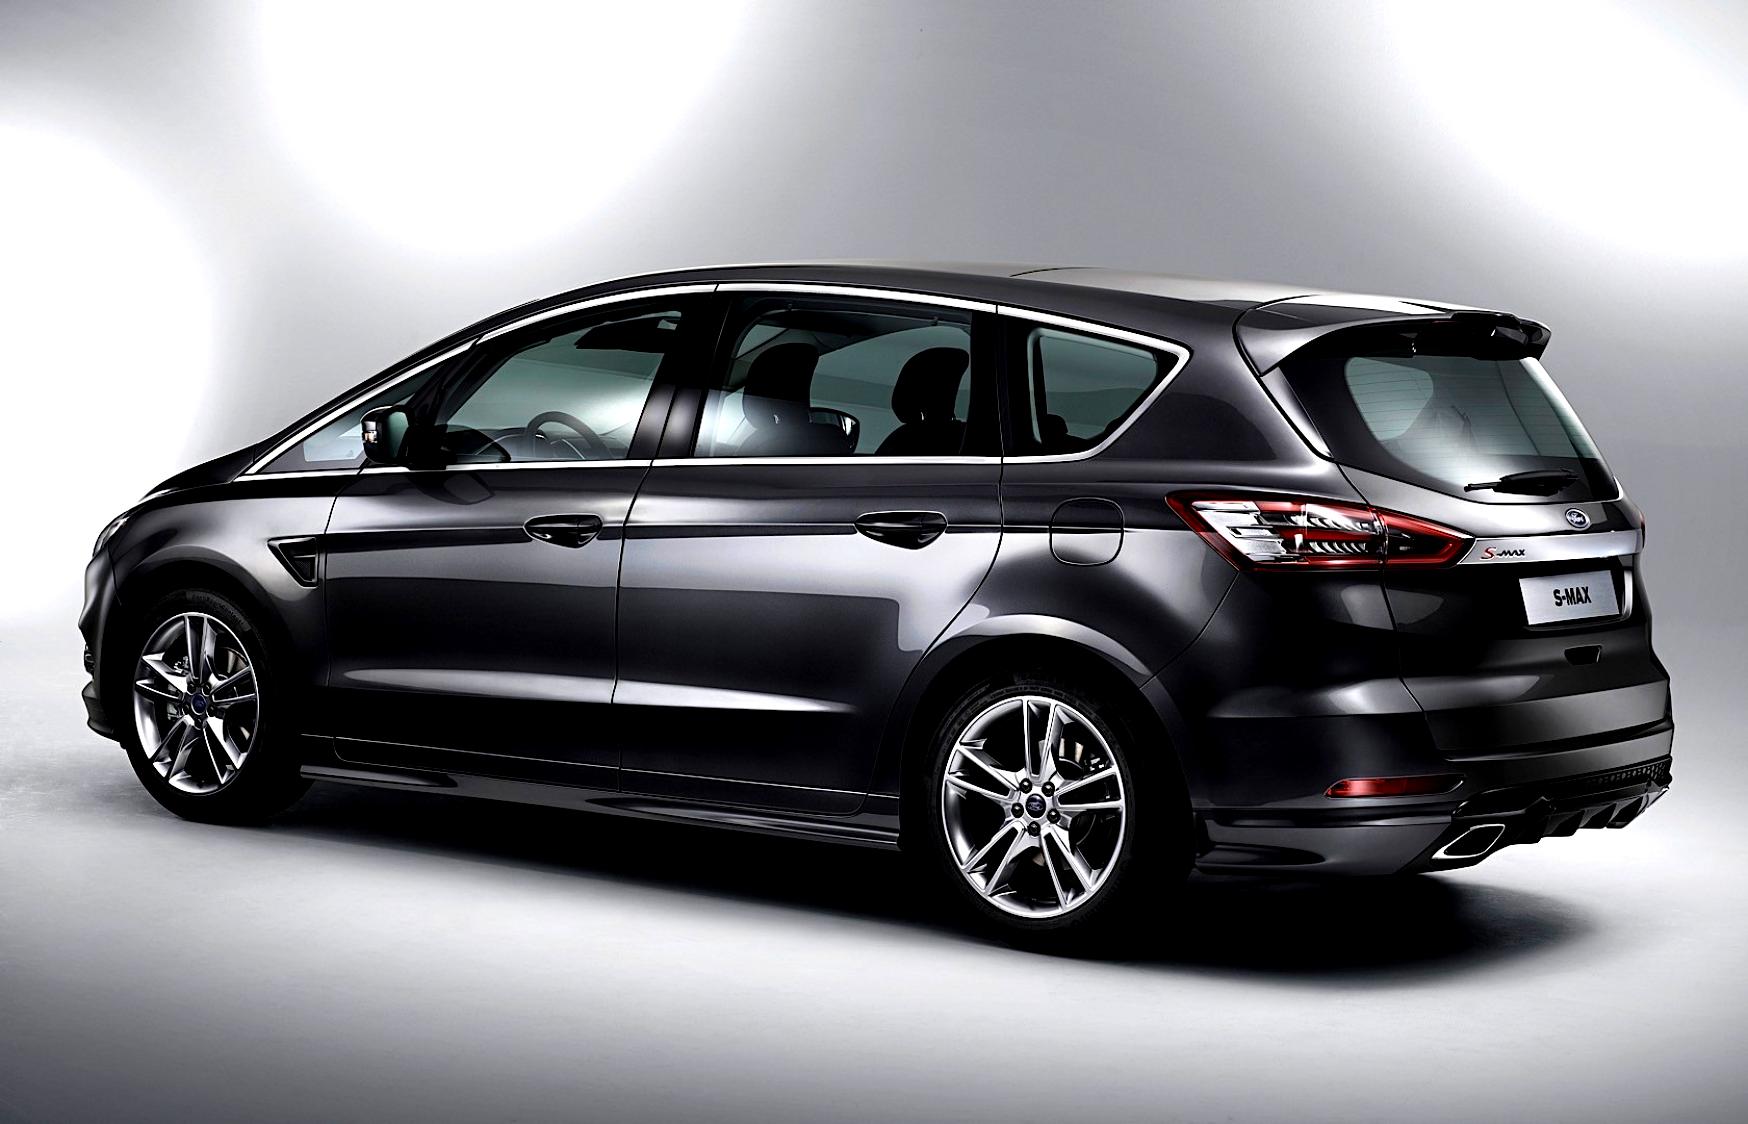 Ford S-Max 2015 #45